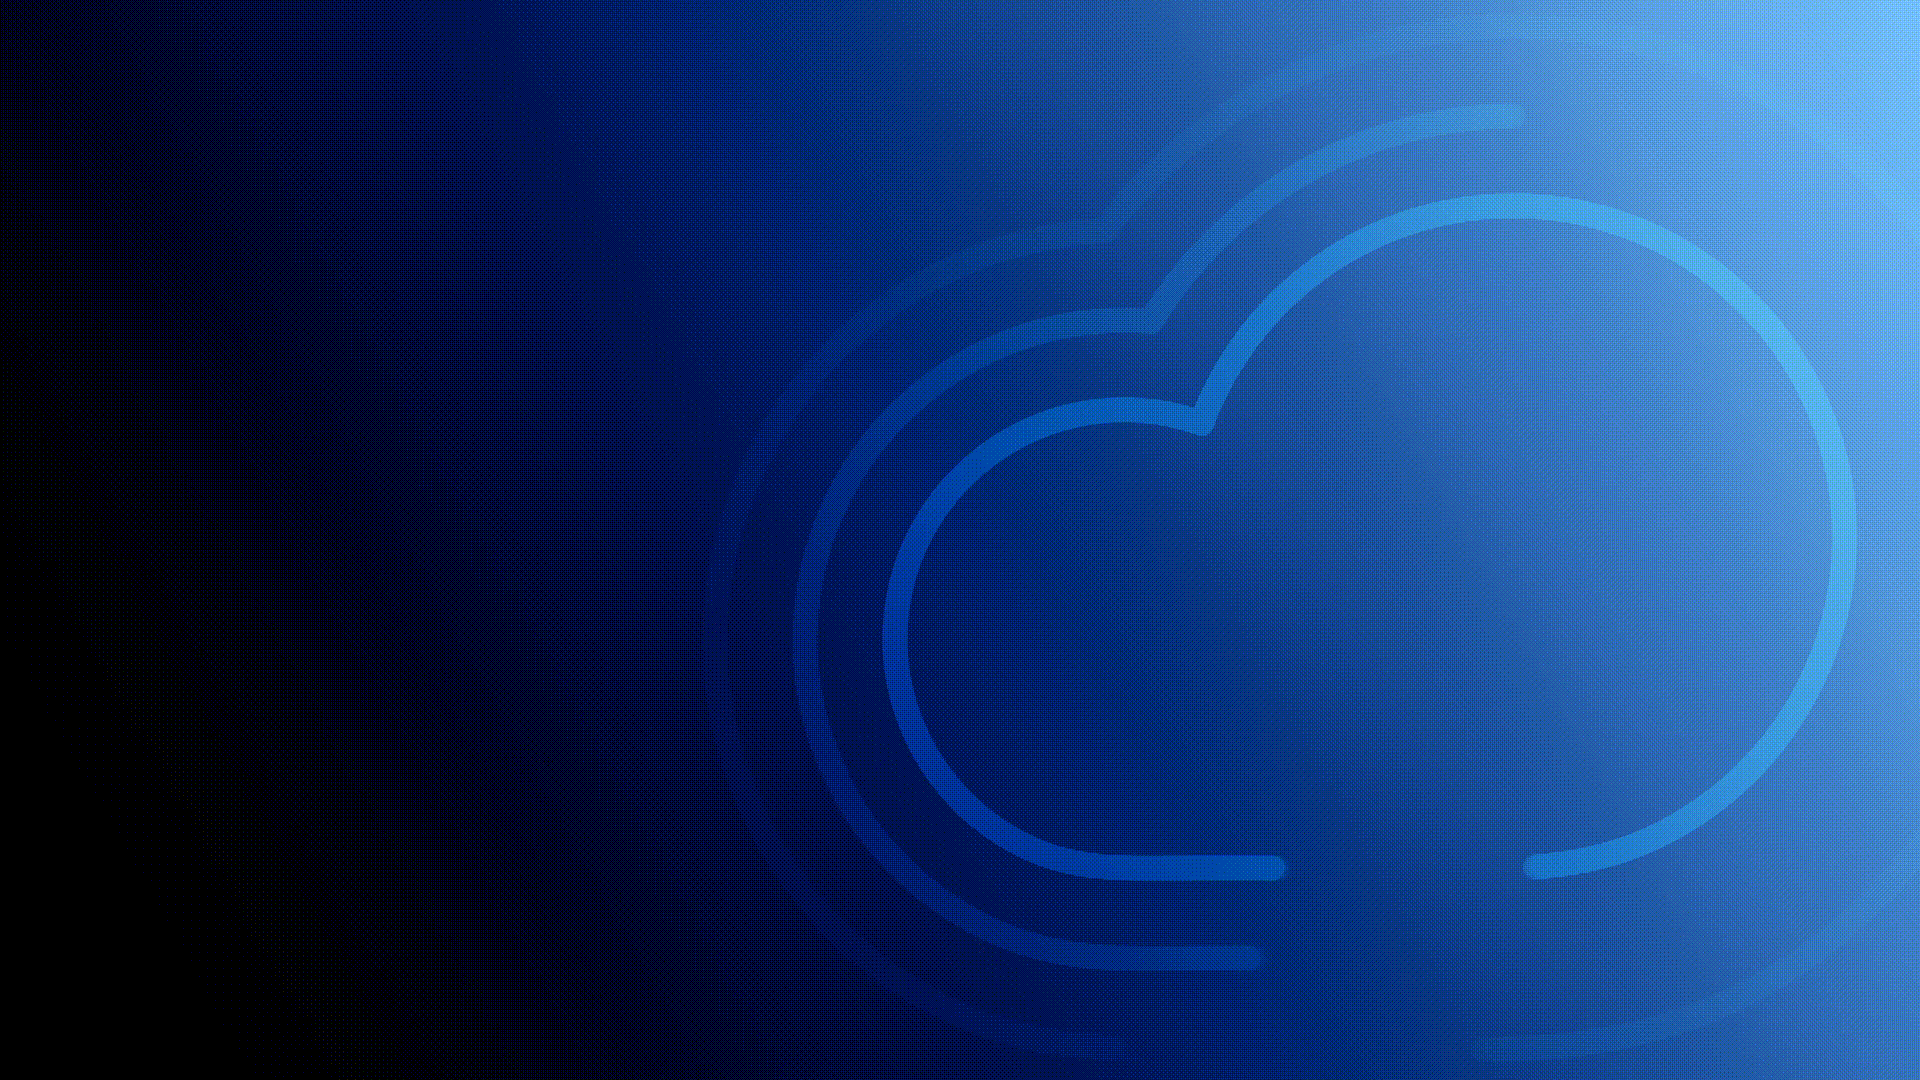  Animated outlines of a cloud on a blue gradient background